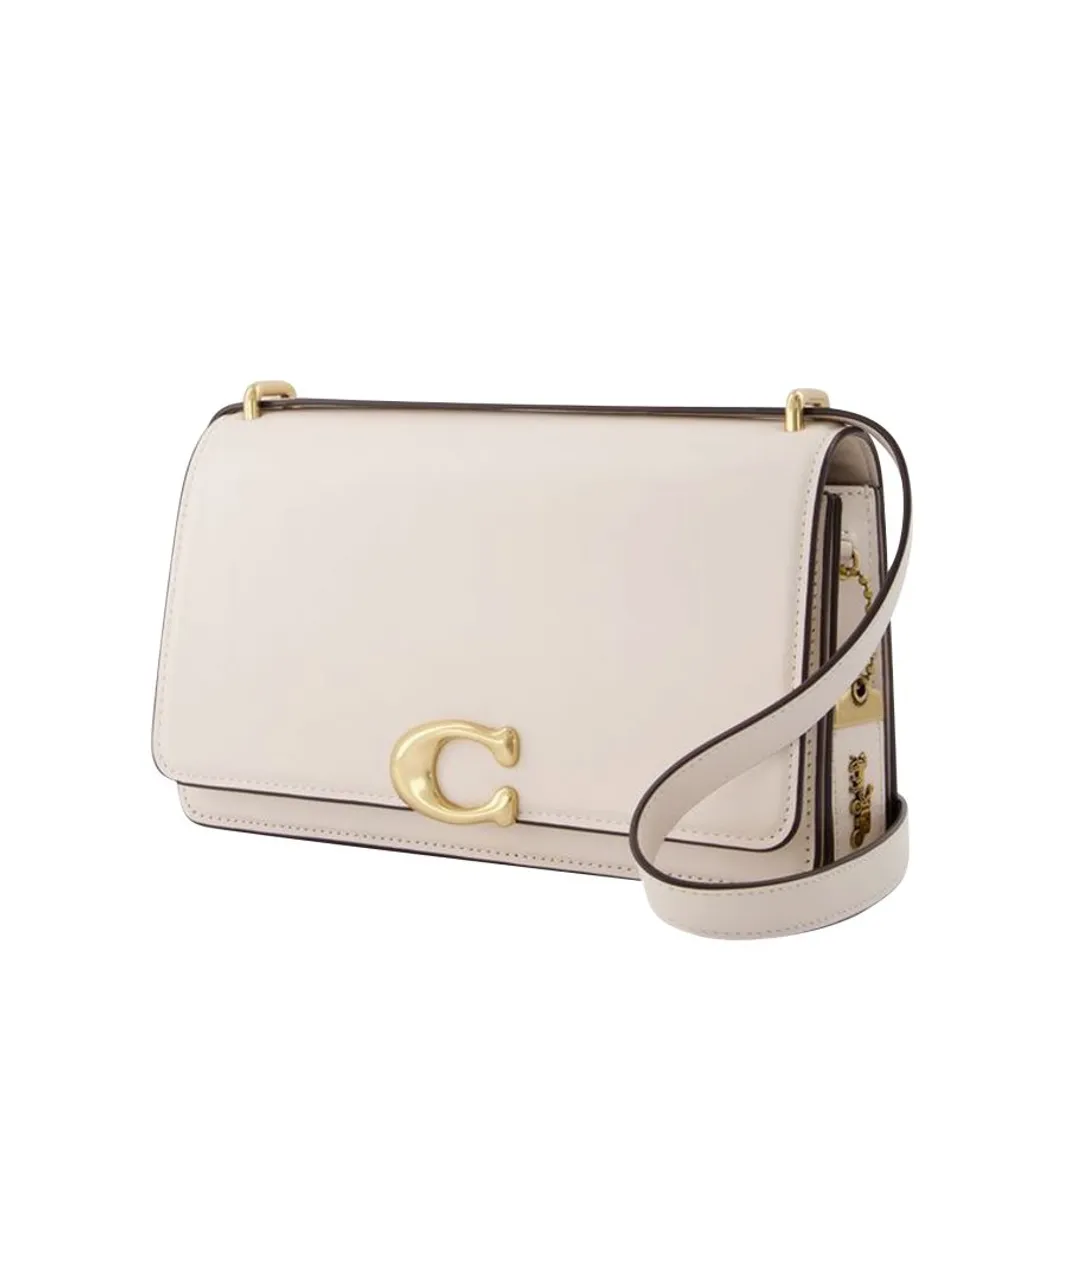 Coach Womens Bandit Shoulder Bag - - Ivory - Leather - Beige Leather (archived) - One Size